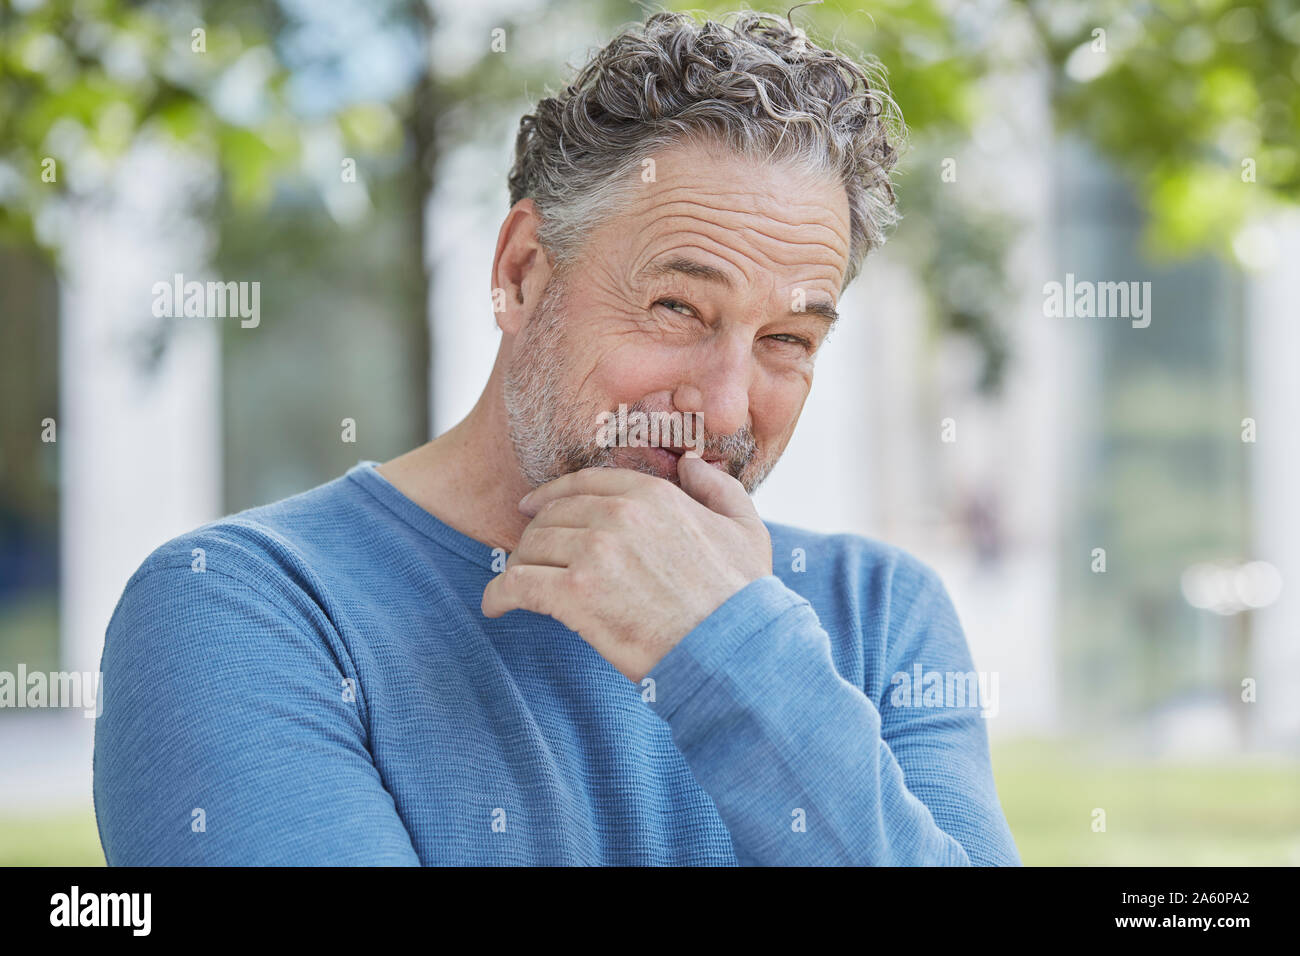 Portrait of smiling mature man in a park Stock Photo